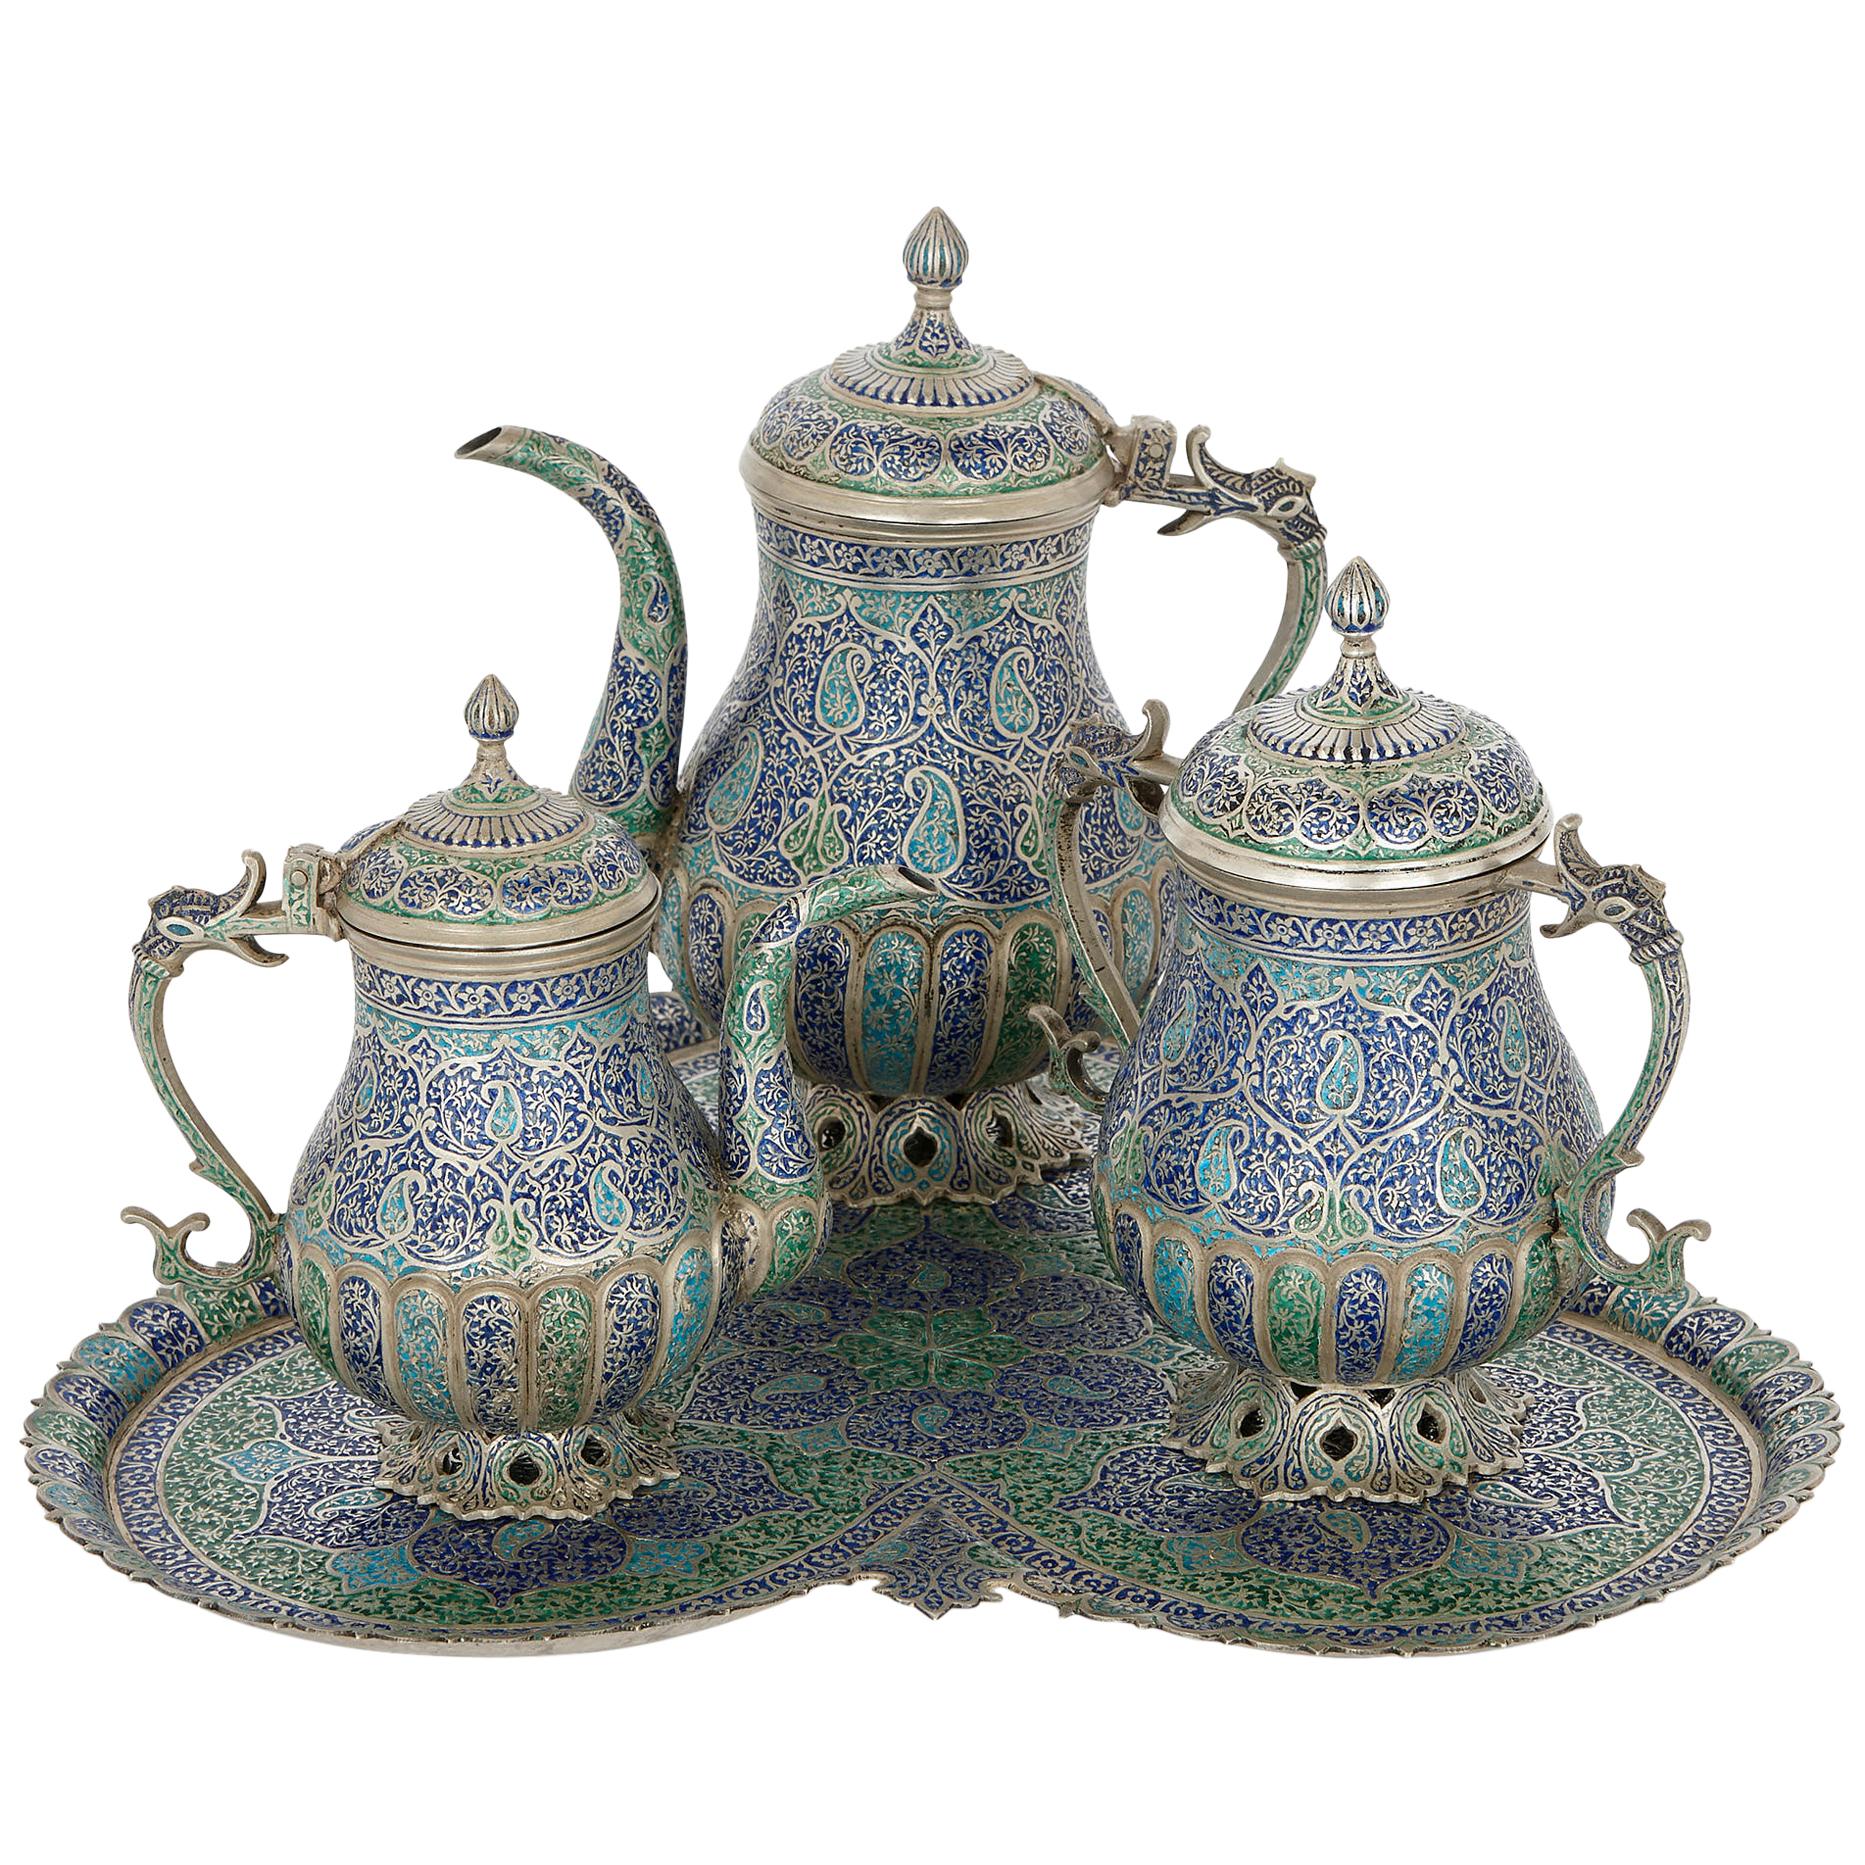 Four Piece Indian Kashmiri Silver and Enamel Tea and Coffee Service